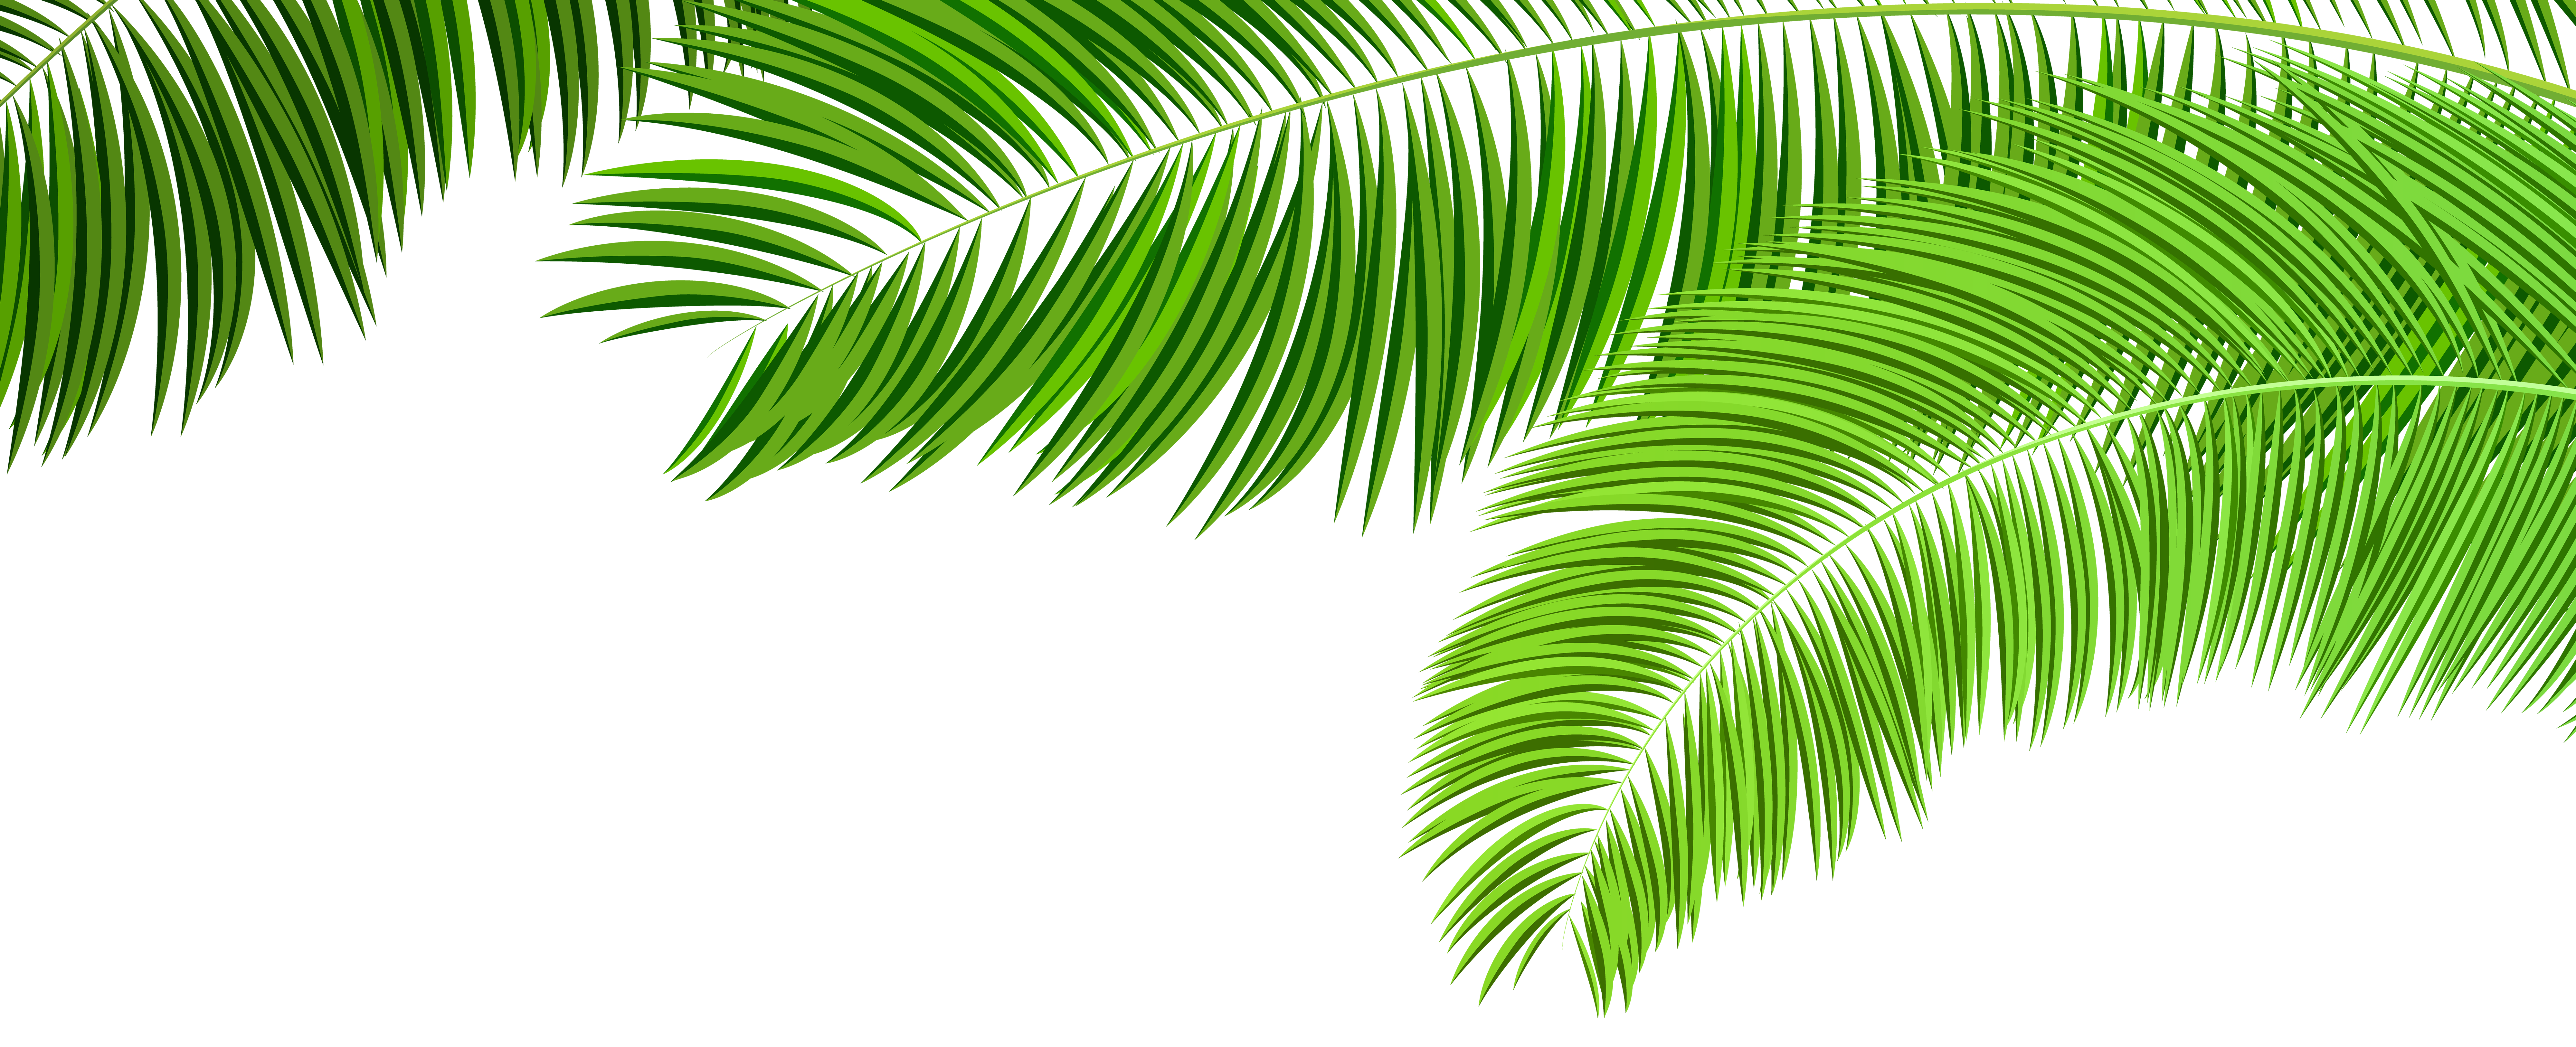 Palm Branches Decoration PNG Clip Art Image | Gallery ...